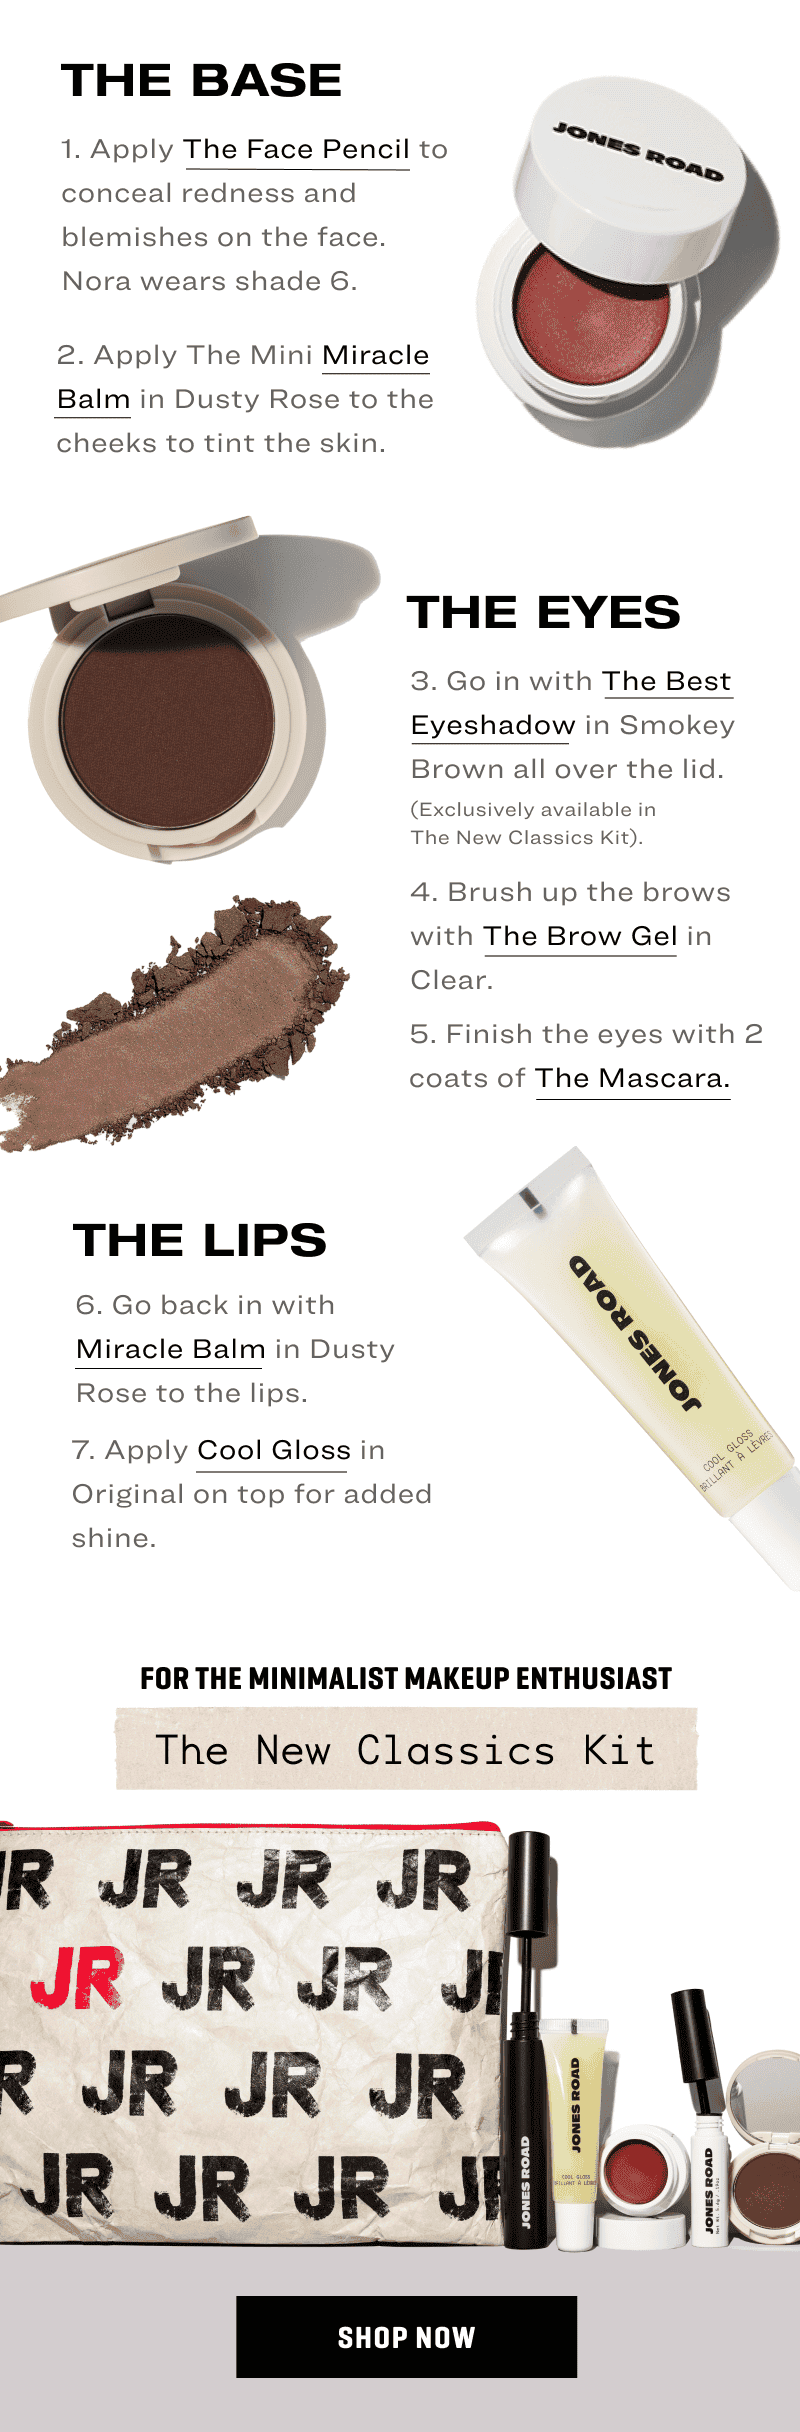 For The Minimalist Makeup Enthusiast